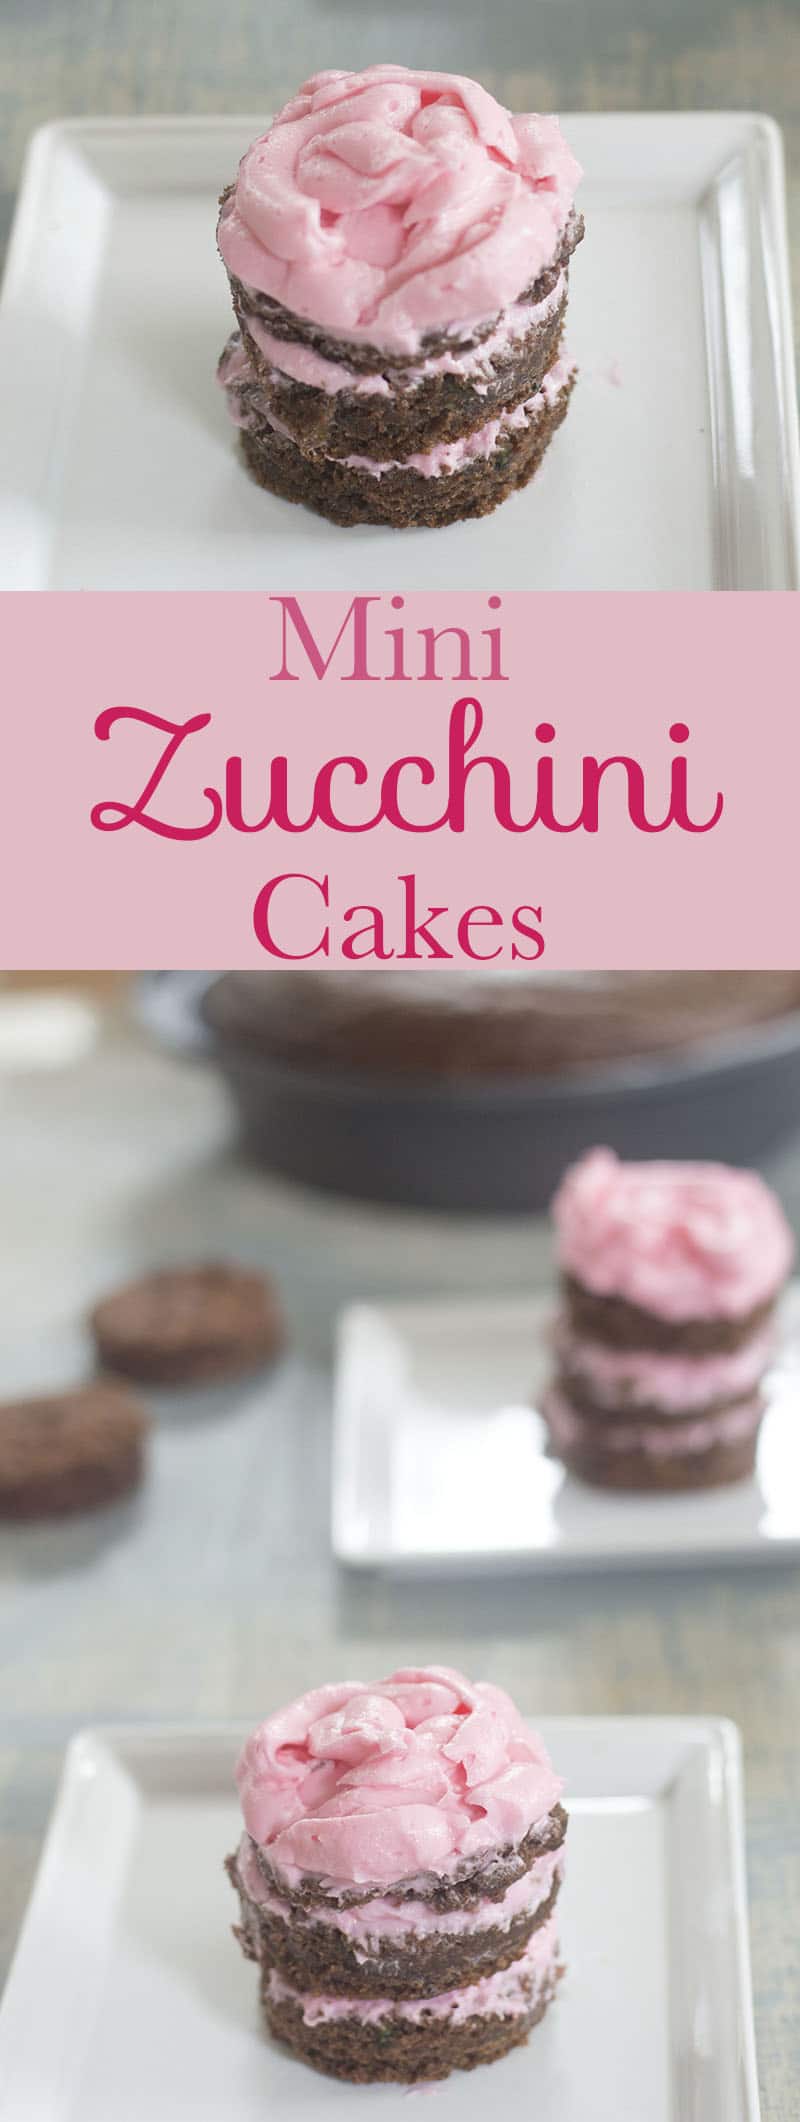 Mini Zucchini chocolate cakes layered with vegan buttercream frosting and using Nesquik chocolate powder. Perfect after school snack #ad #stirimagination